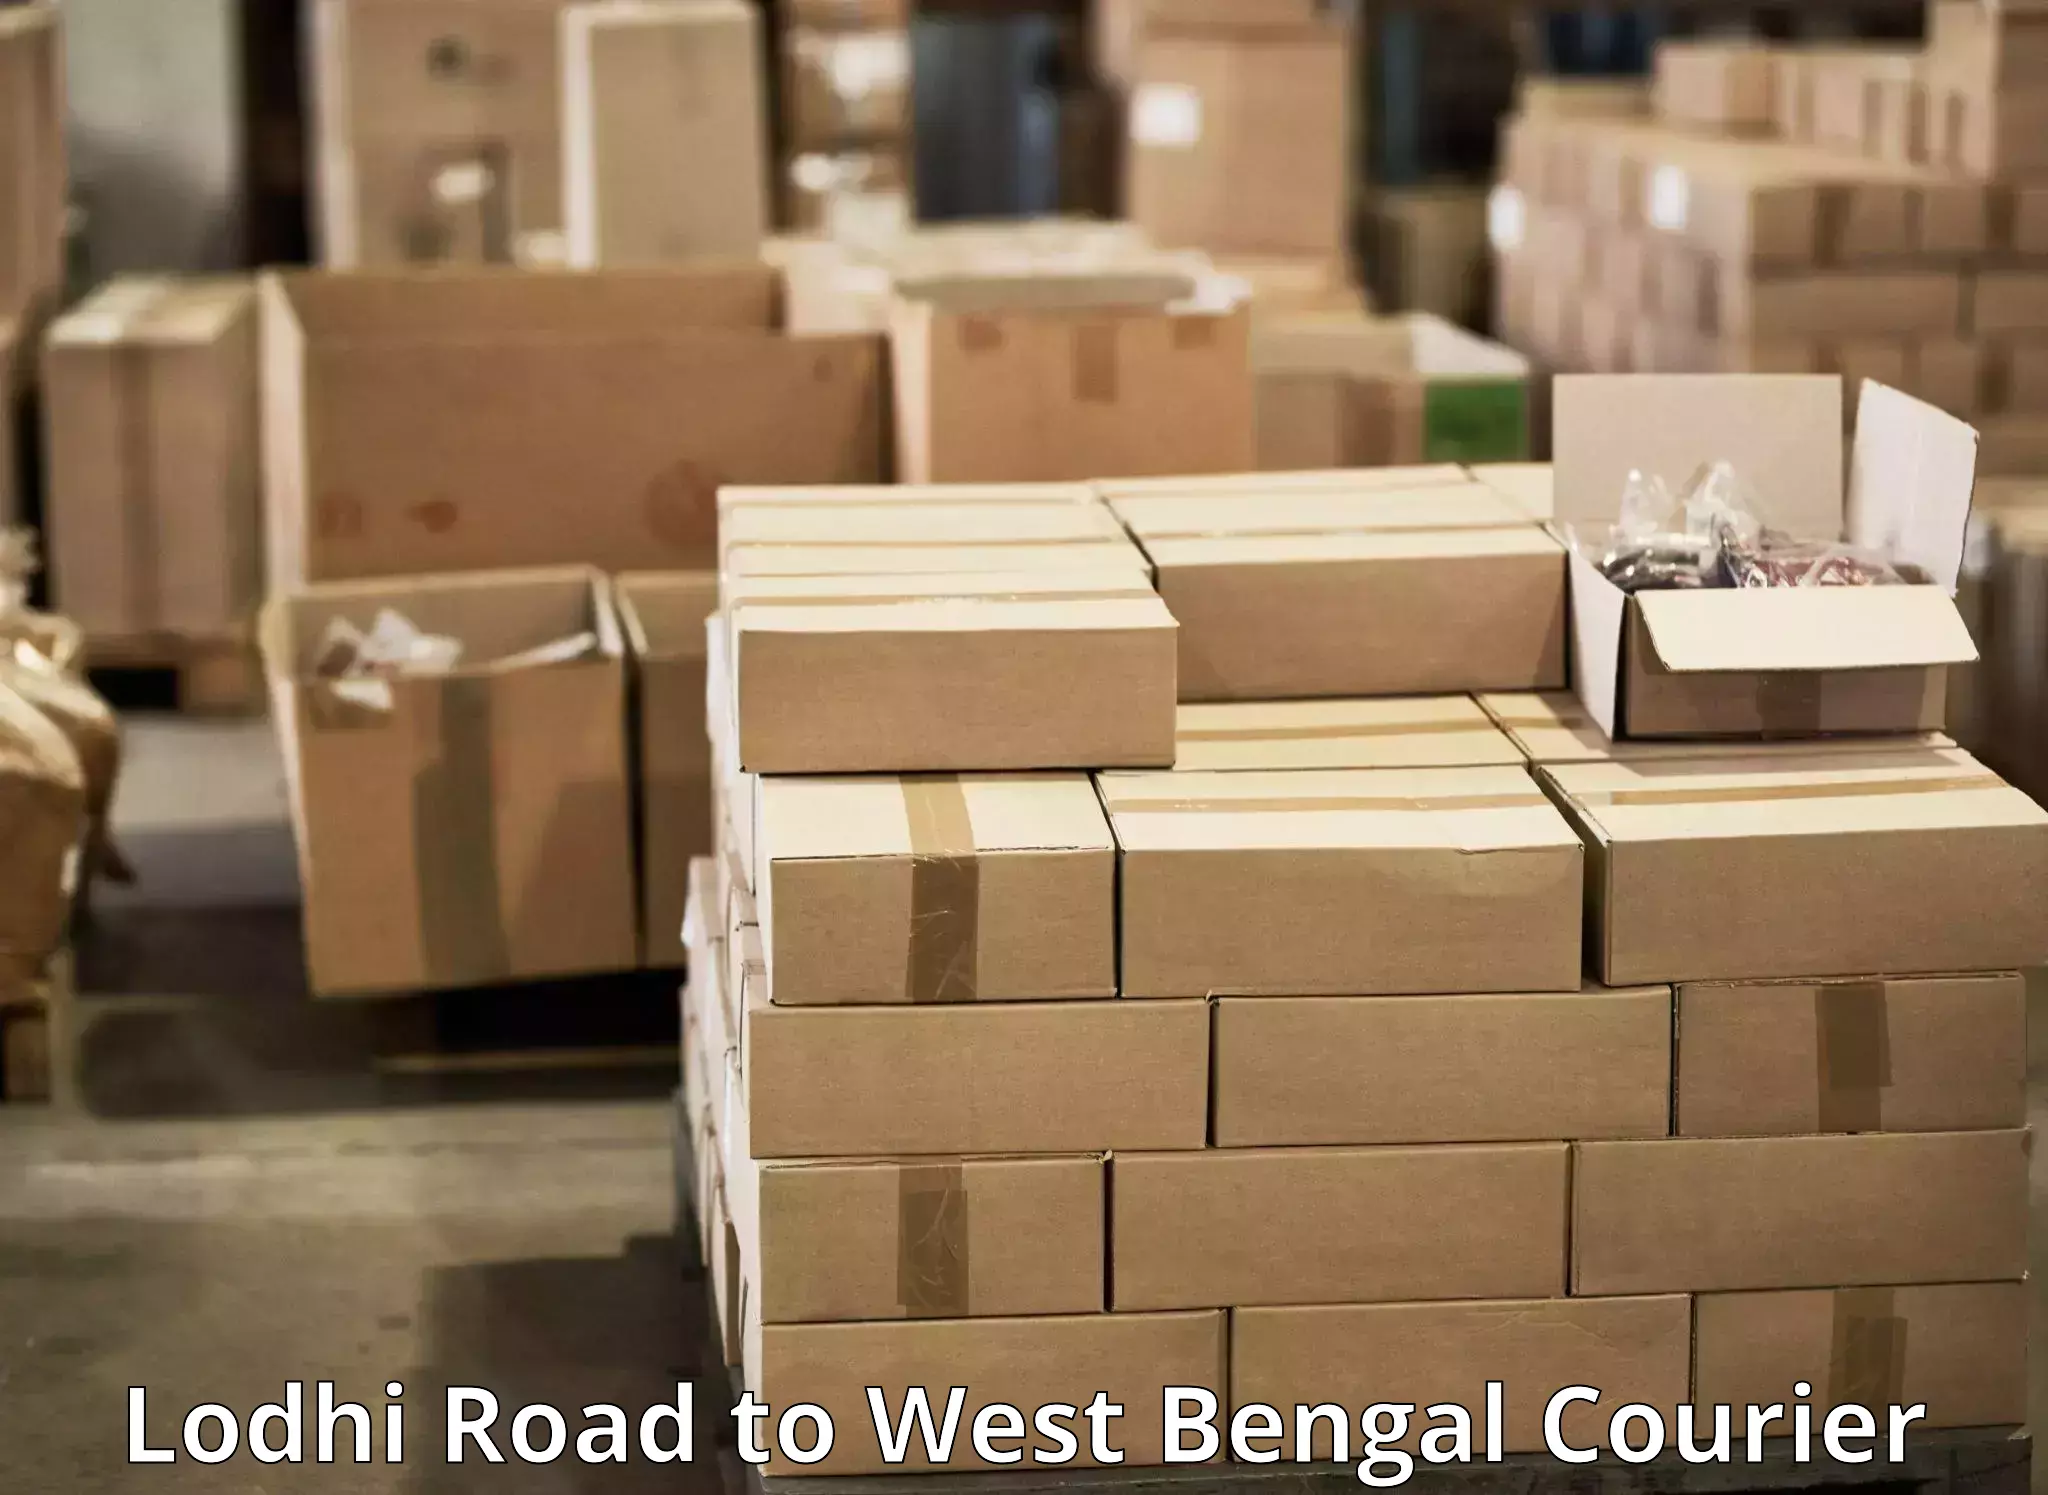 Urgent courier needs Lodhi Road to Budge Budge